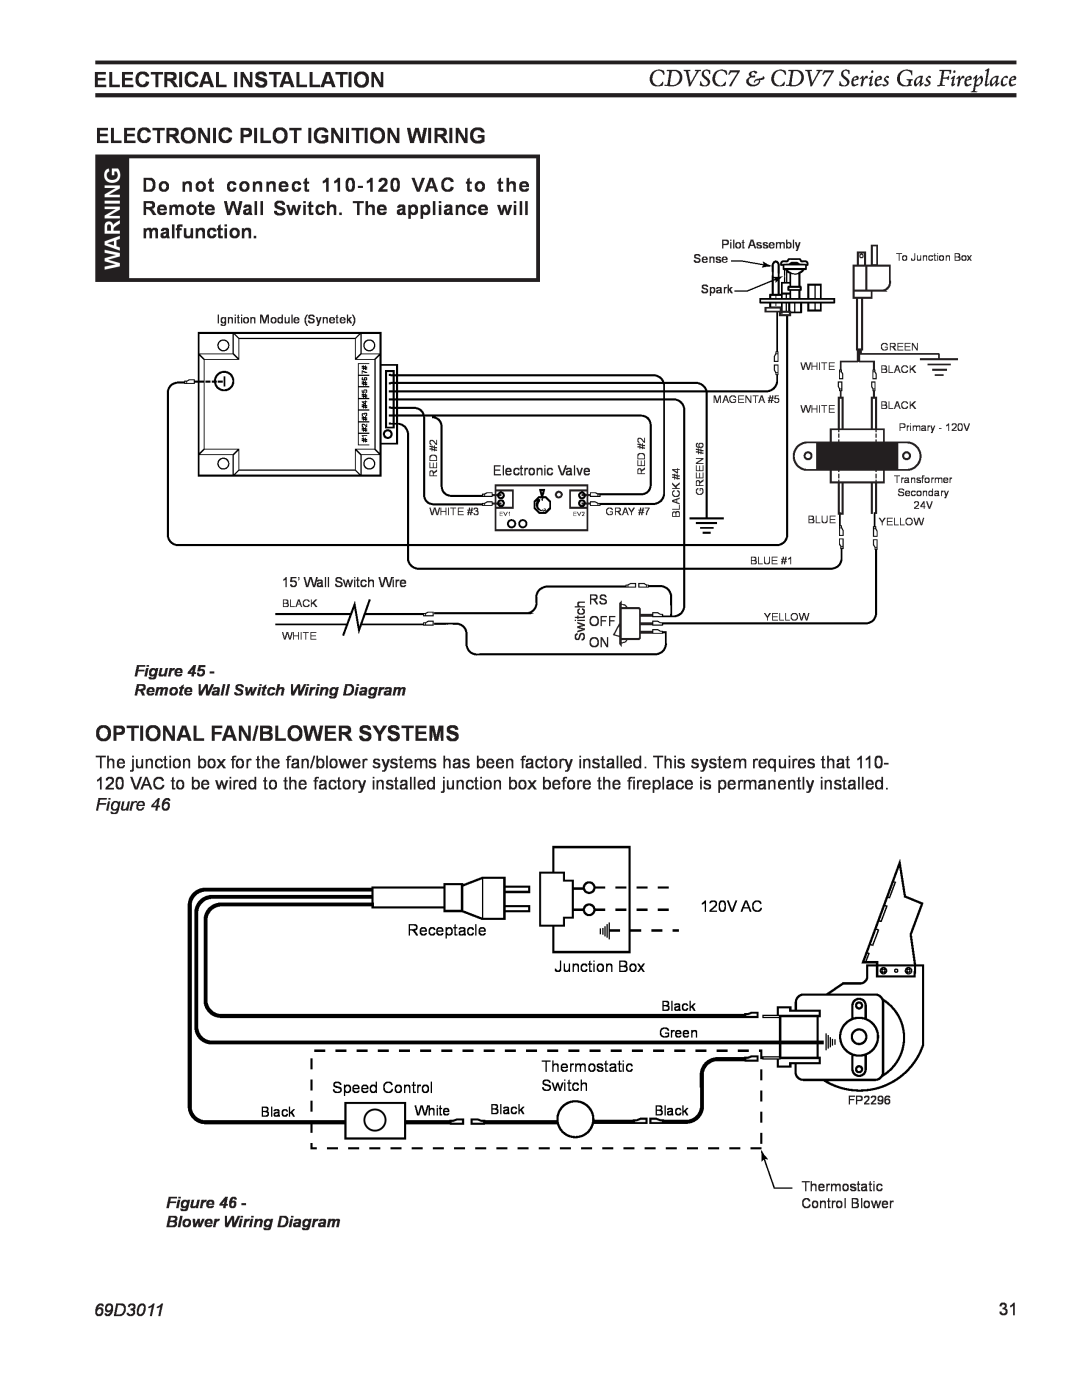 Monessen Hearth CDV7 manual Electronic Pilot Ignition Wiring, Optional Fan/Blower Systems, Do not connect 110-120VAC to the 